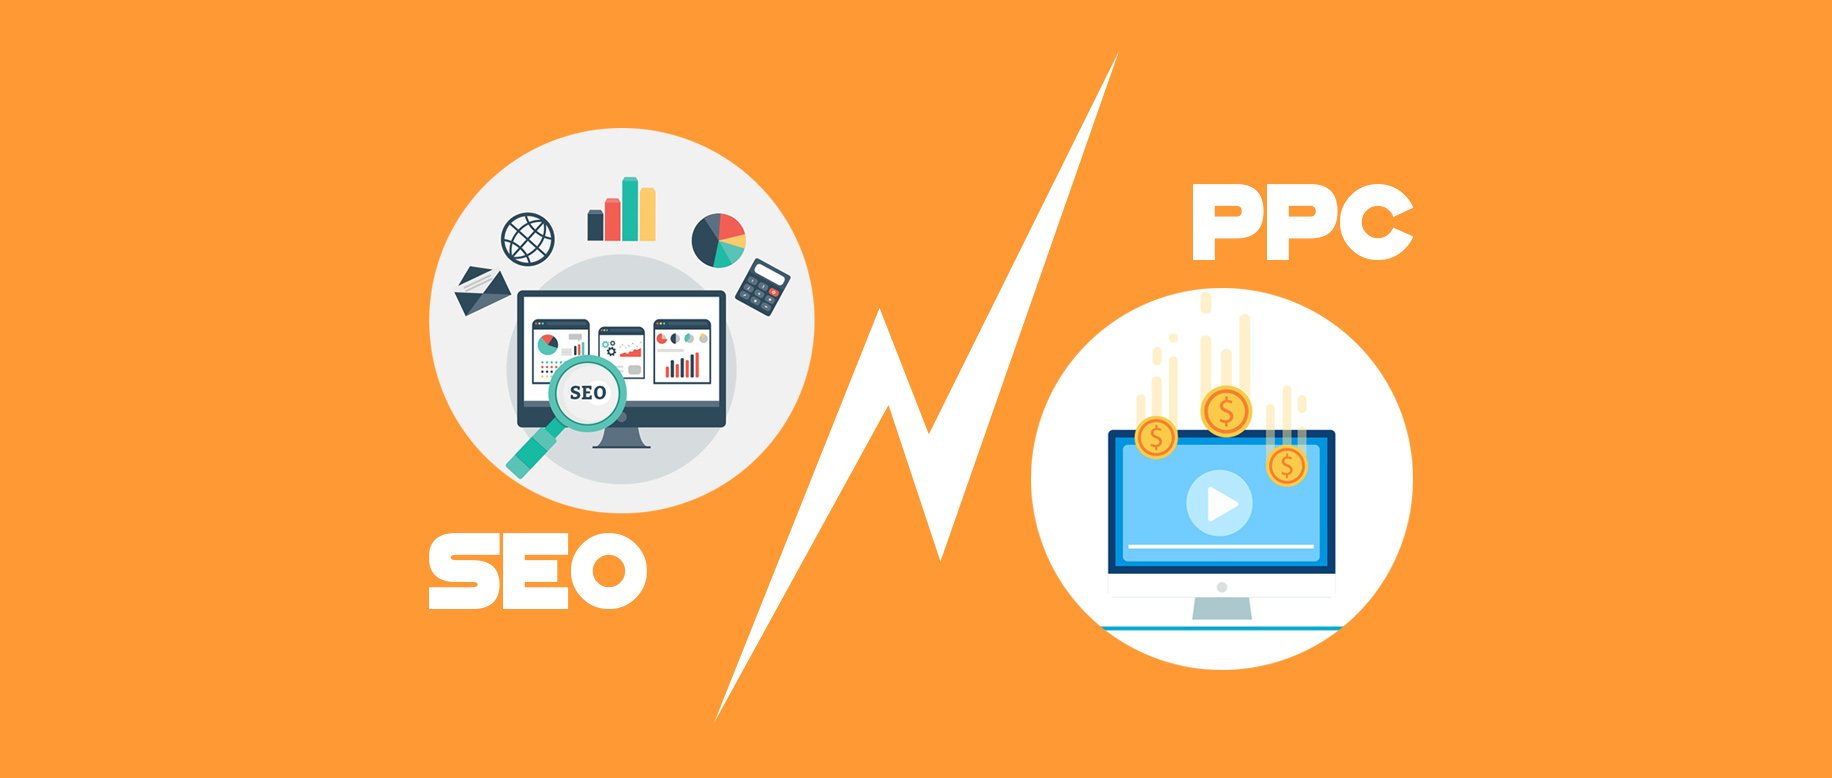 Benifits of SEO and PPC